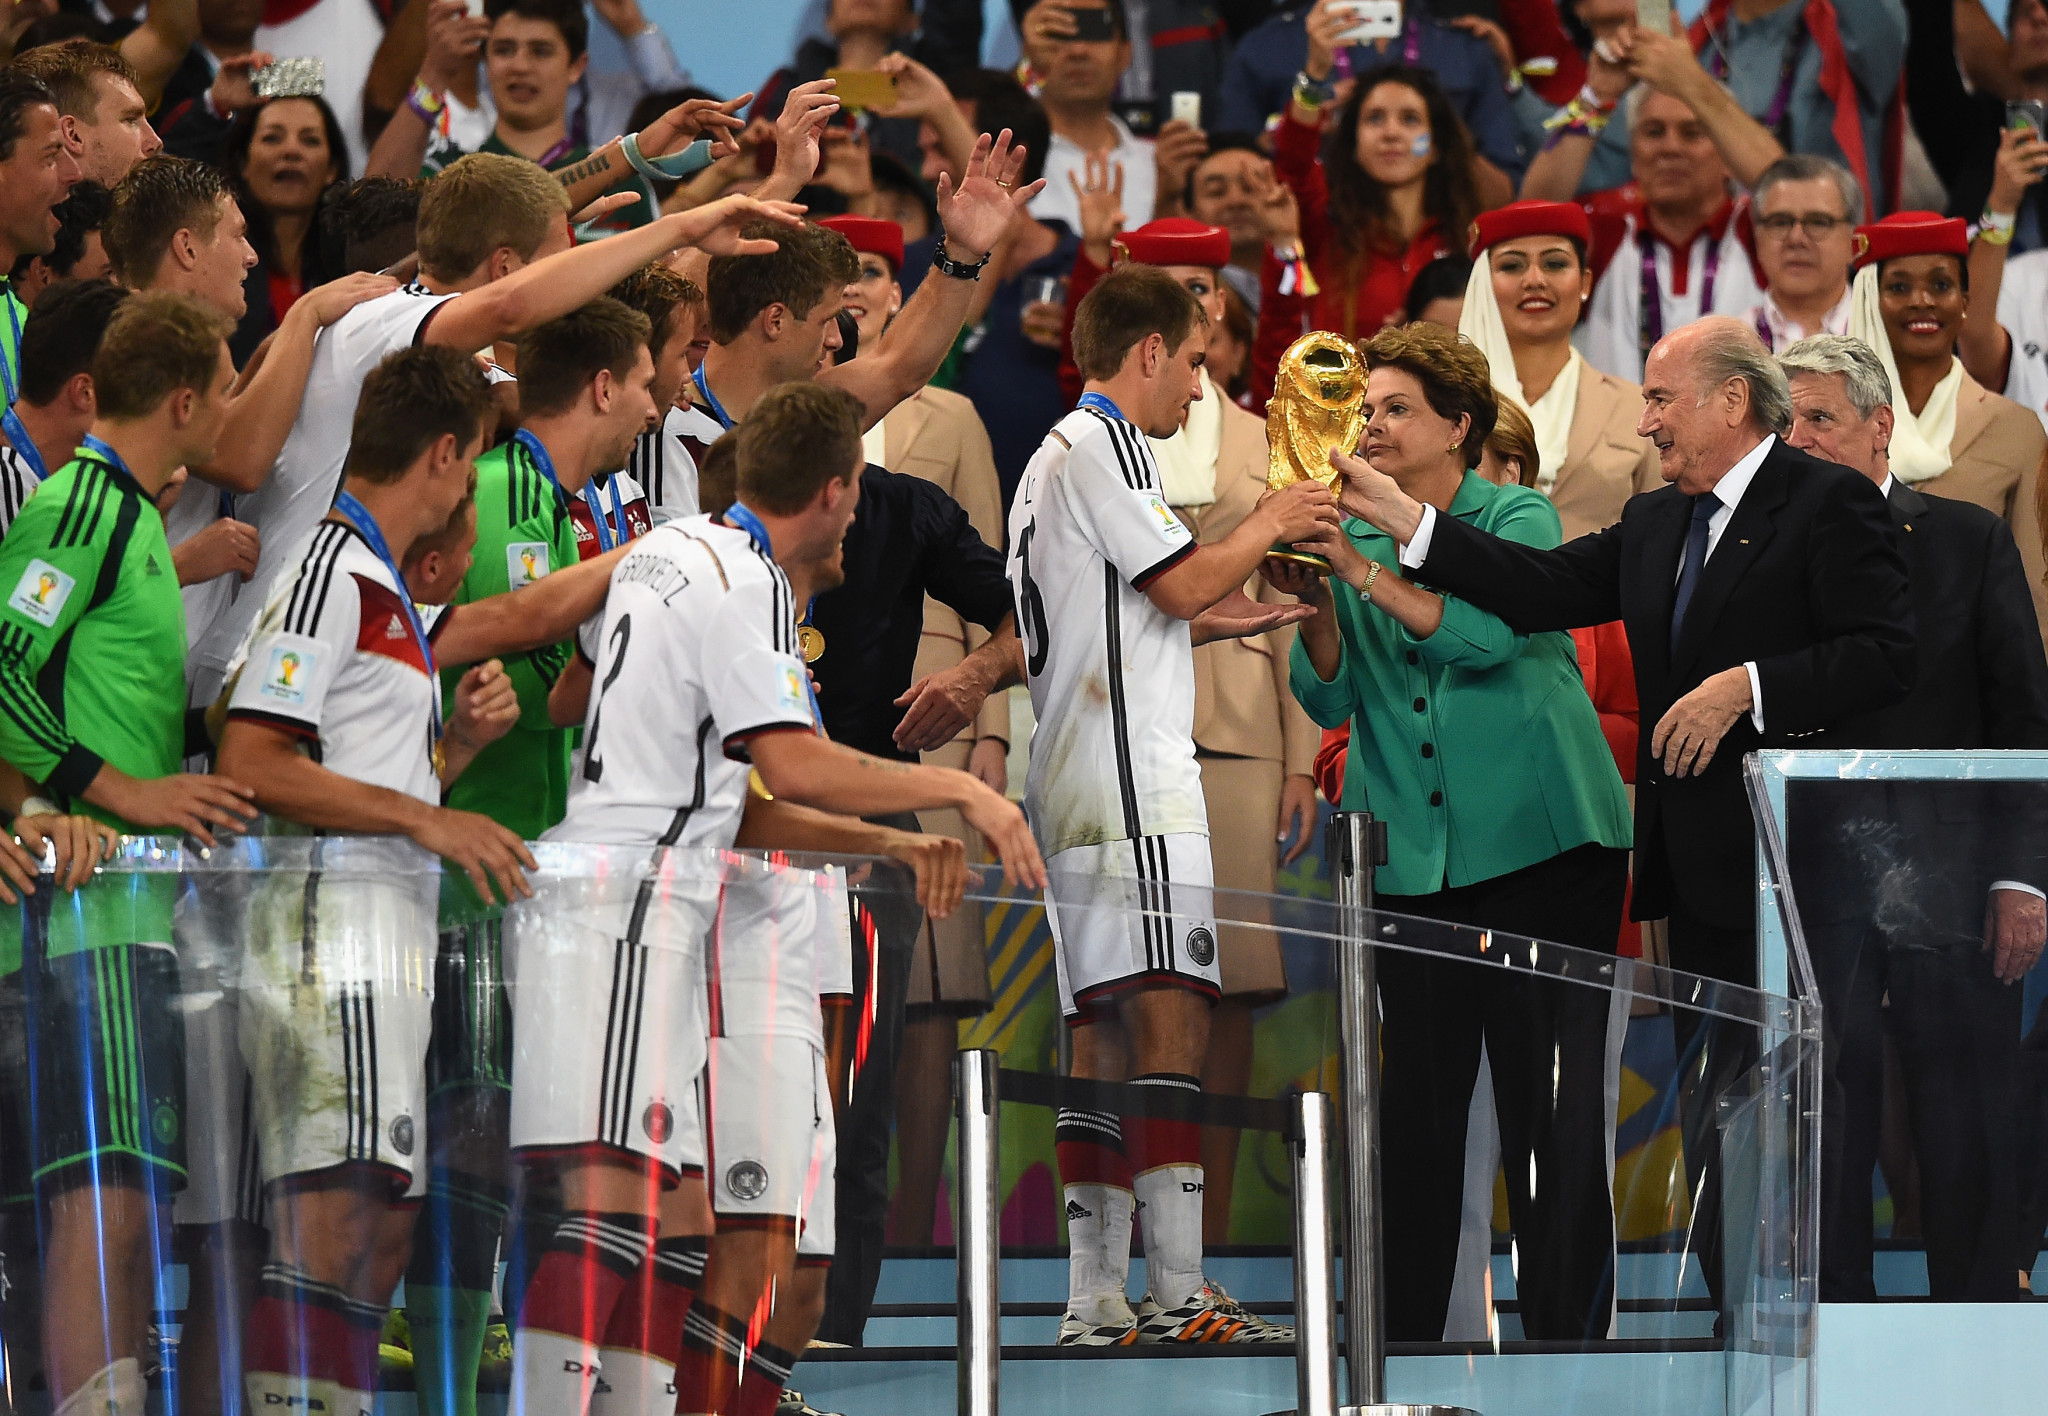 Phillip Lahm is handed the World Cup after Germany's 1-0 final victory over Argentina in 2014 ©Getty Images